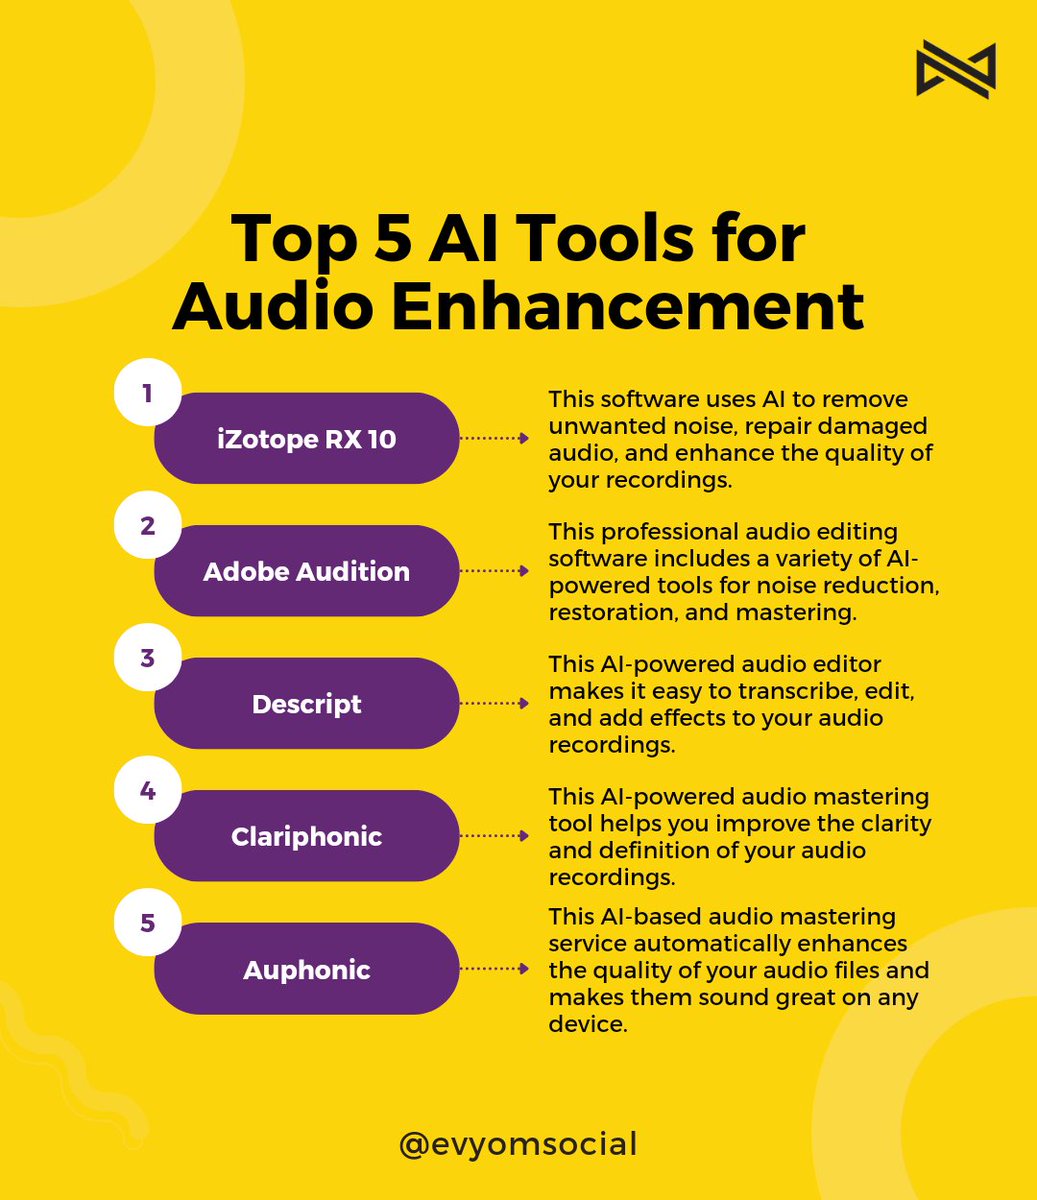 There are several AI tools available for audio processing and enhancement. Here are some of the best ones!
-
Follow for more posts like this!
.
.
.
.
.
.
#AIToolsEnhancement #EnhancedAItools #AIadvancements #AIempowerment #NextGenAItools #AIenhancements #AIboost #CuttingEdgeAI